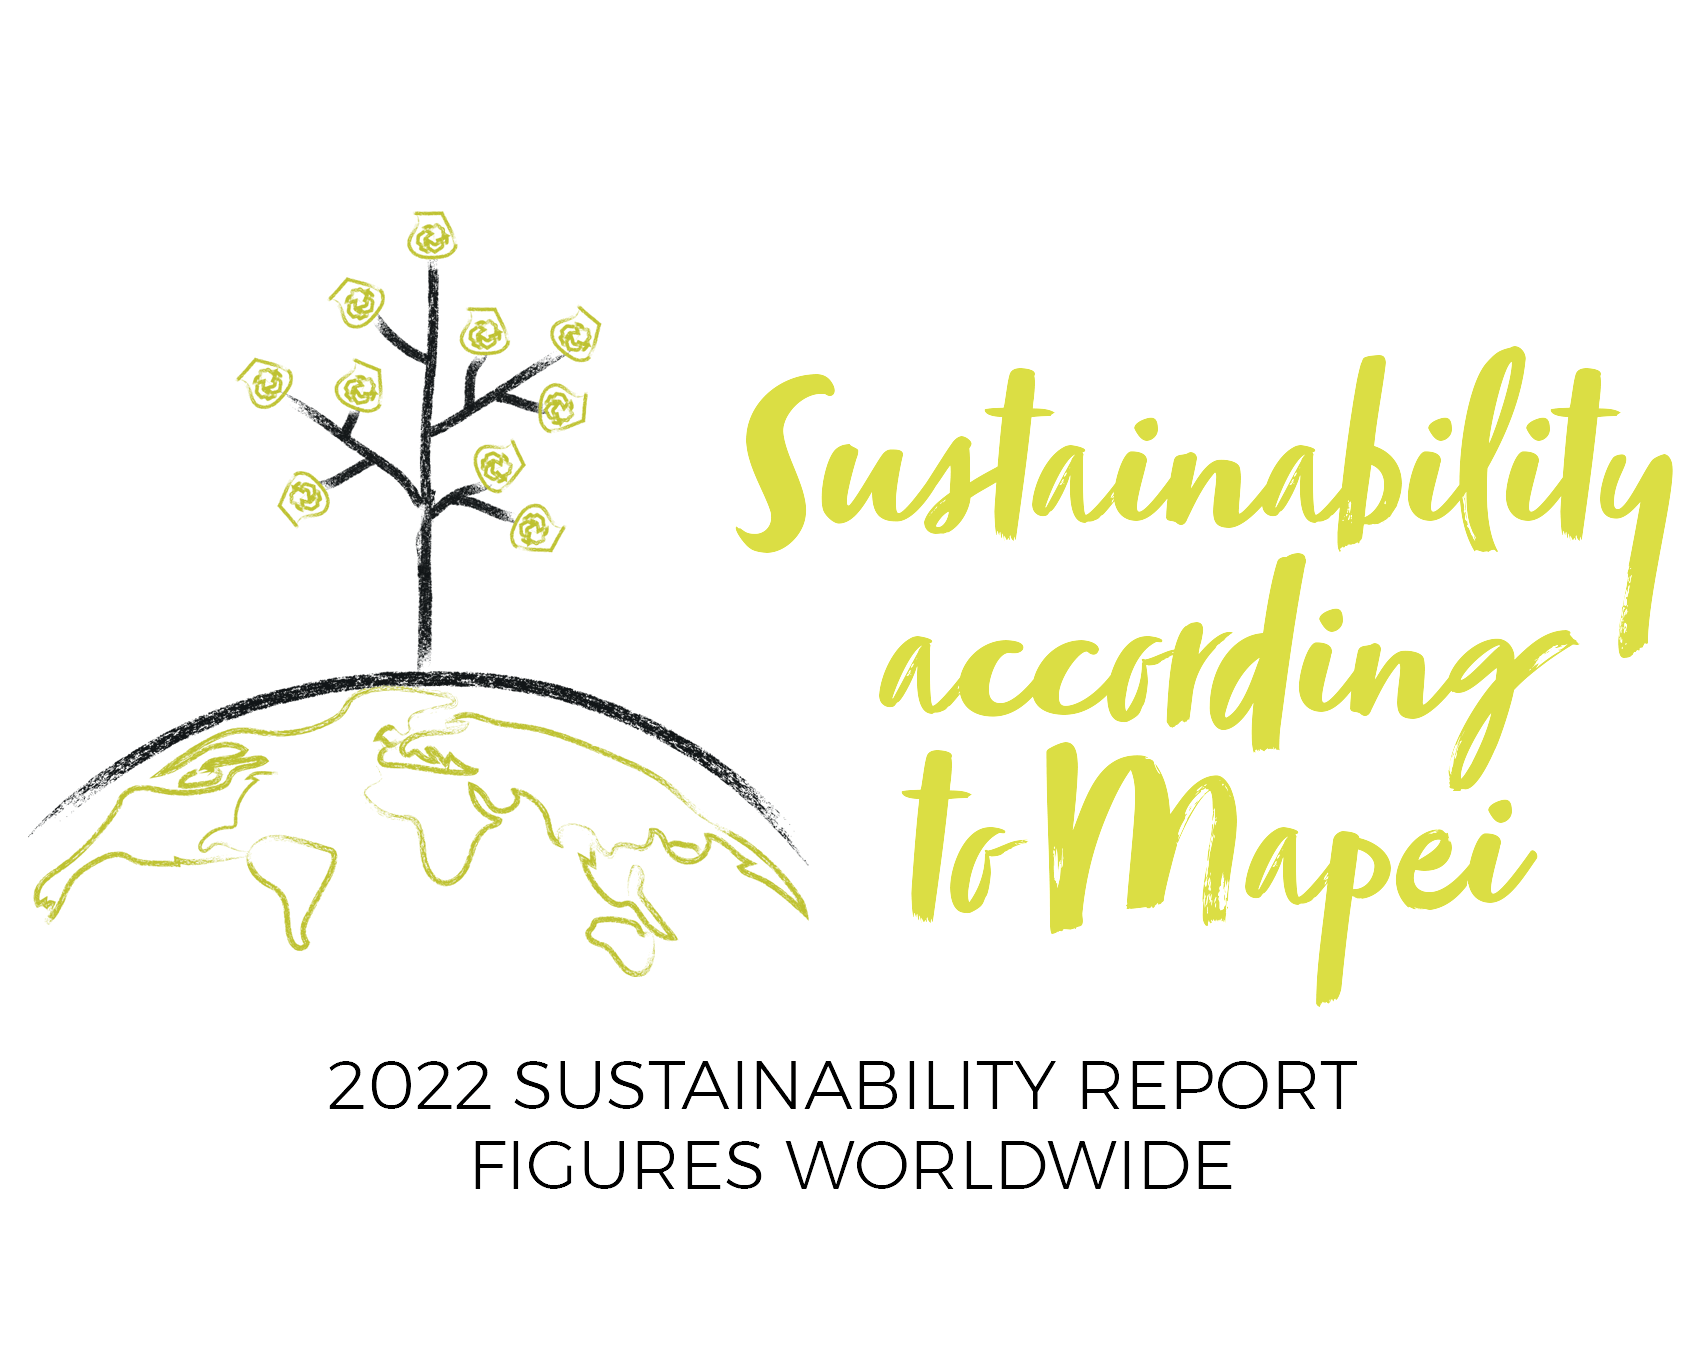 The 2022 MAPEI Sustainability Report Embraces The World